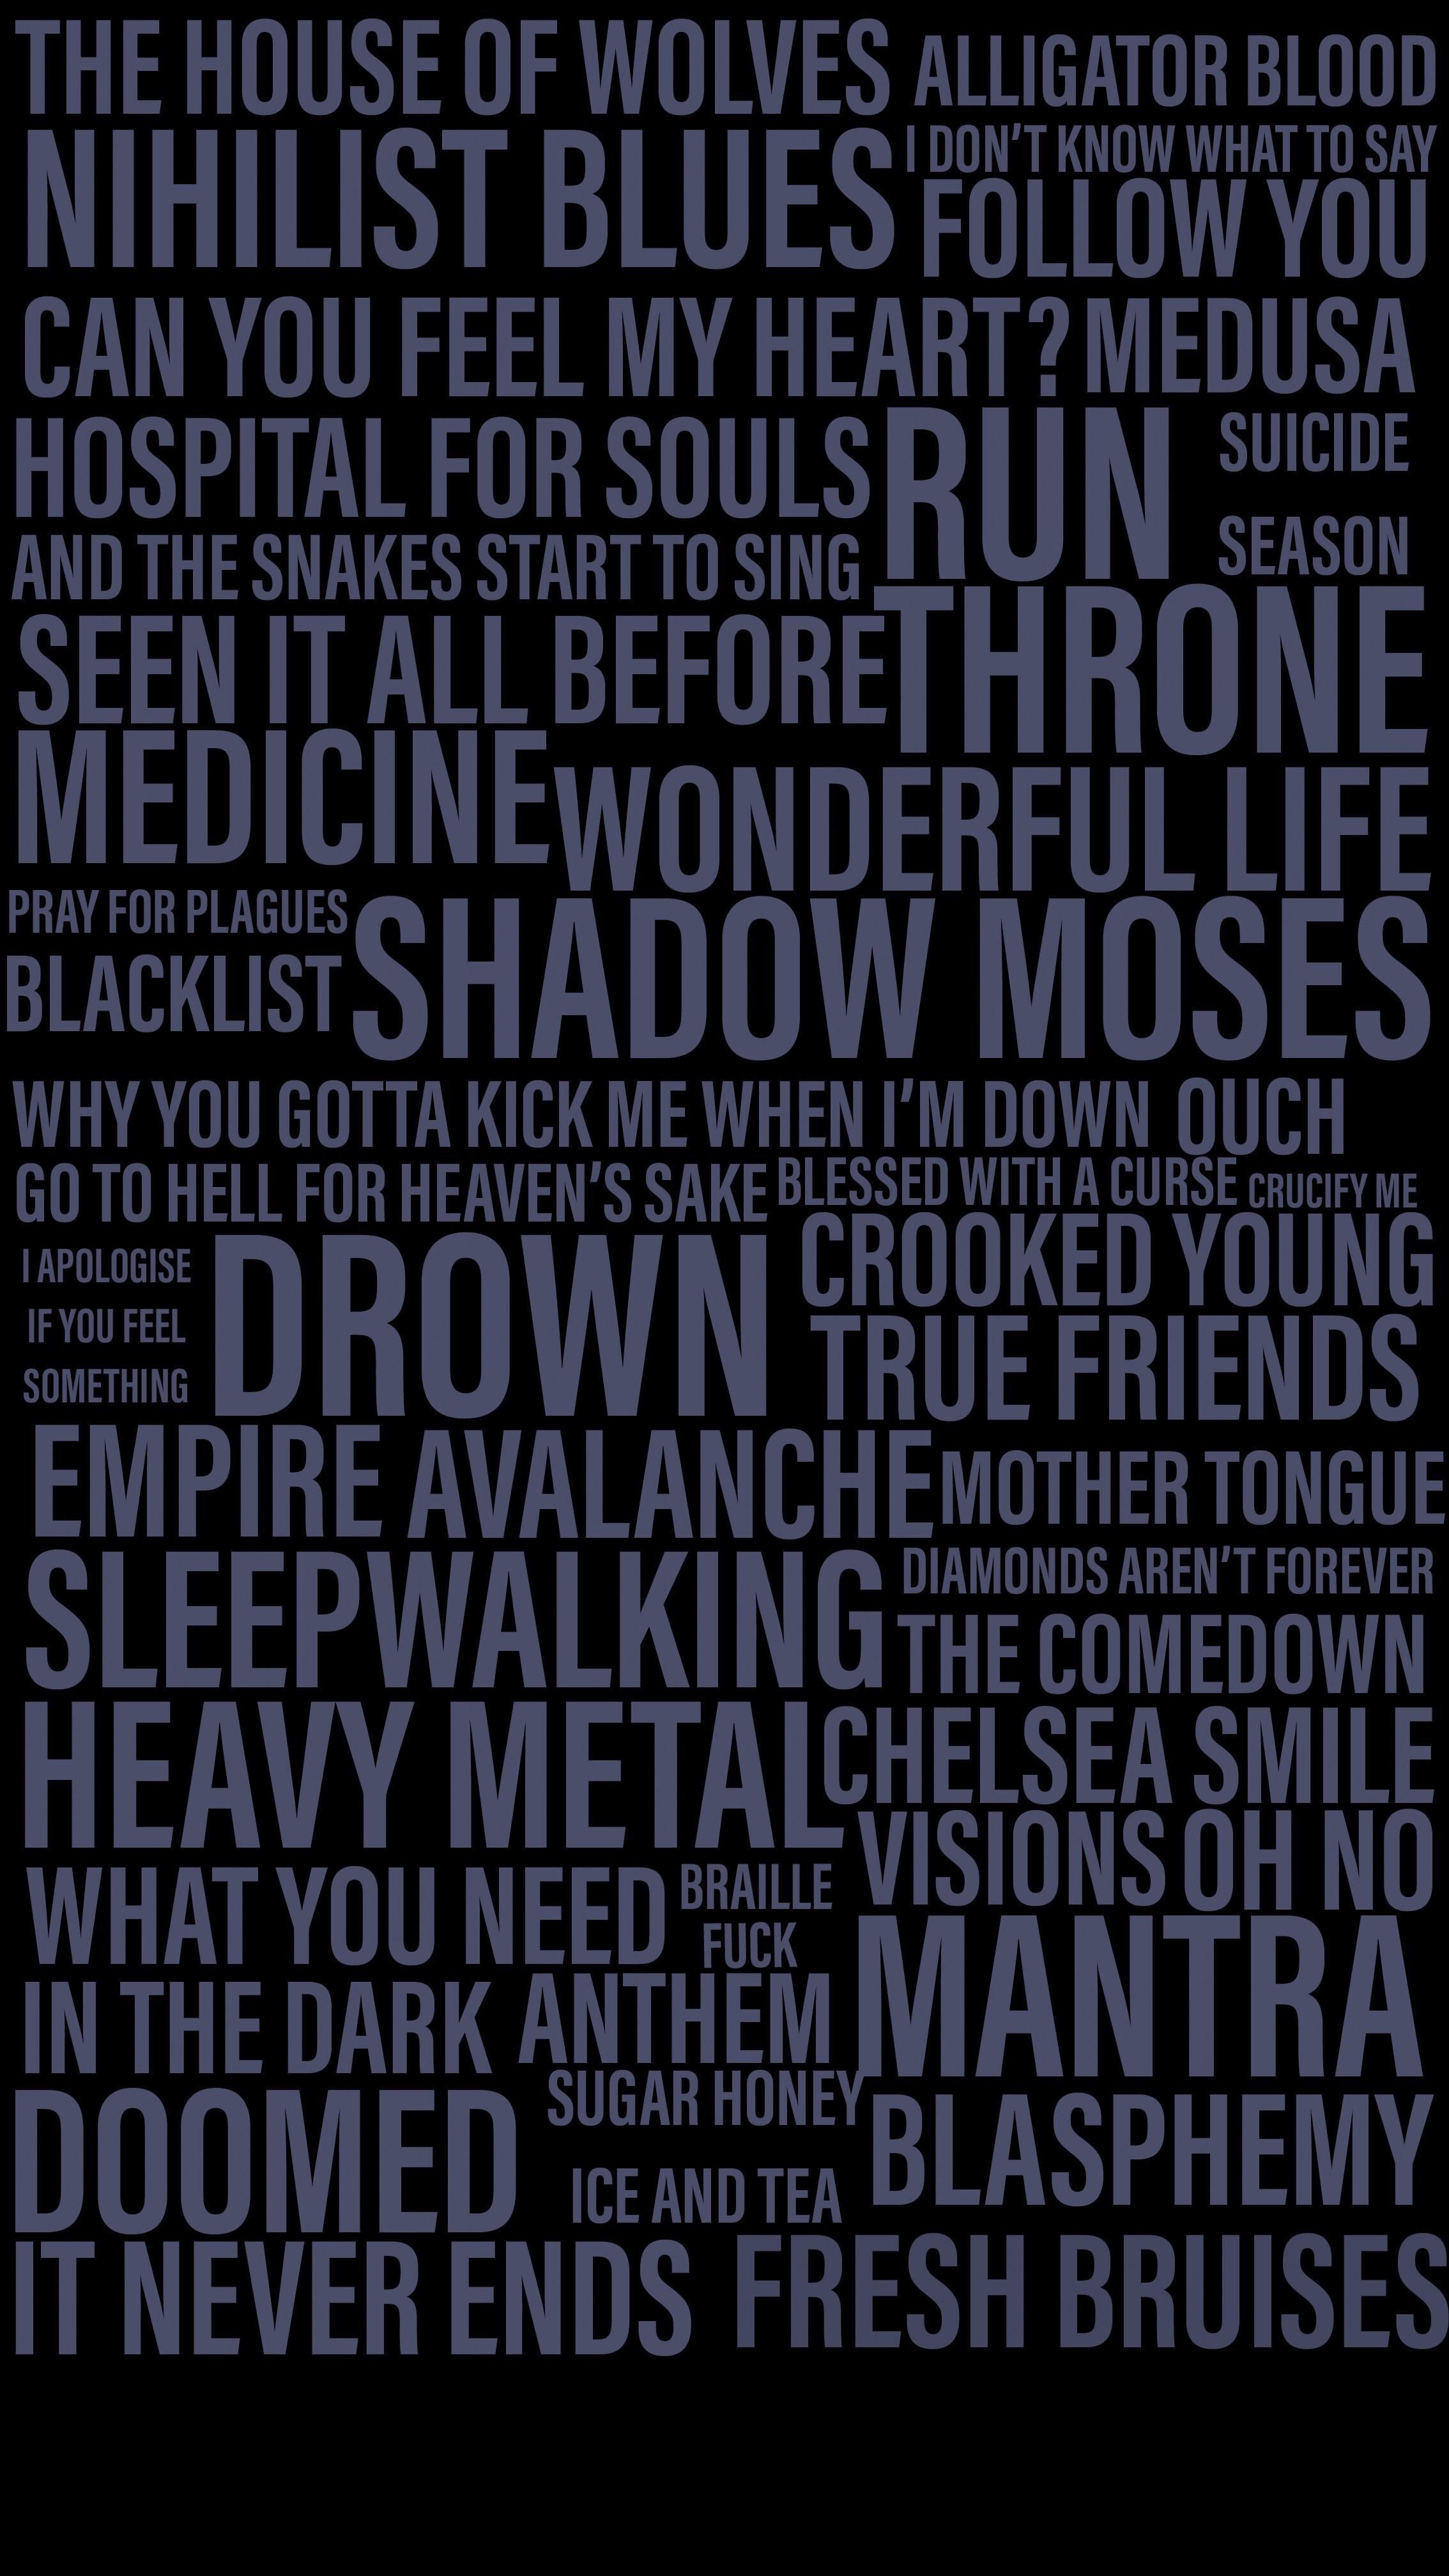 Just spent an hour making this iPhone wallpaper of BMTH song